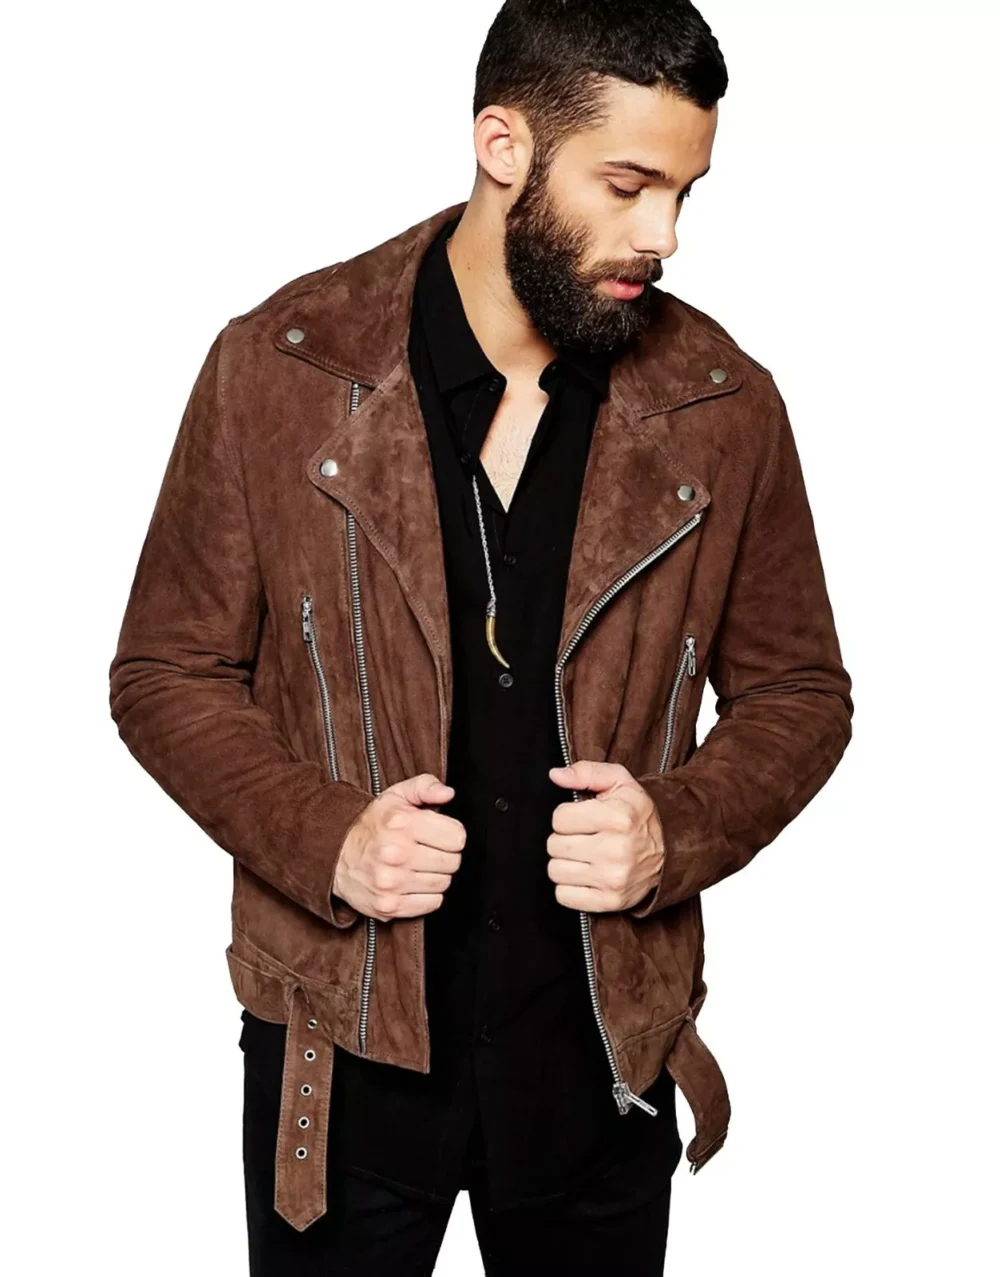 Mens Suede Leather Jacket 2